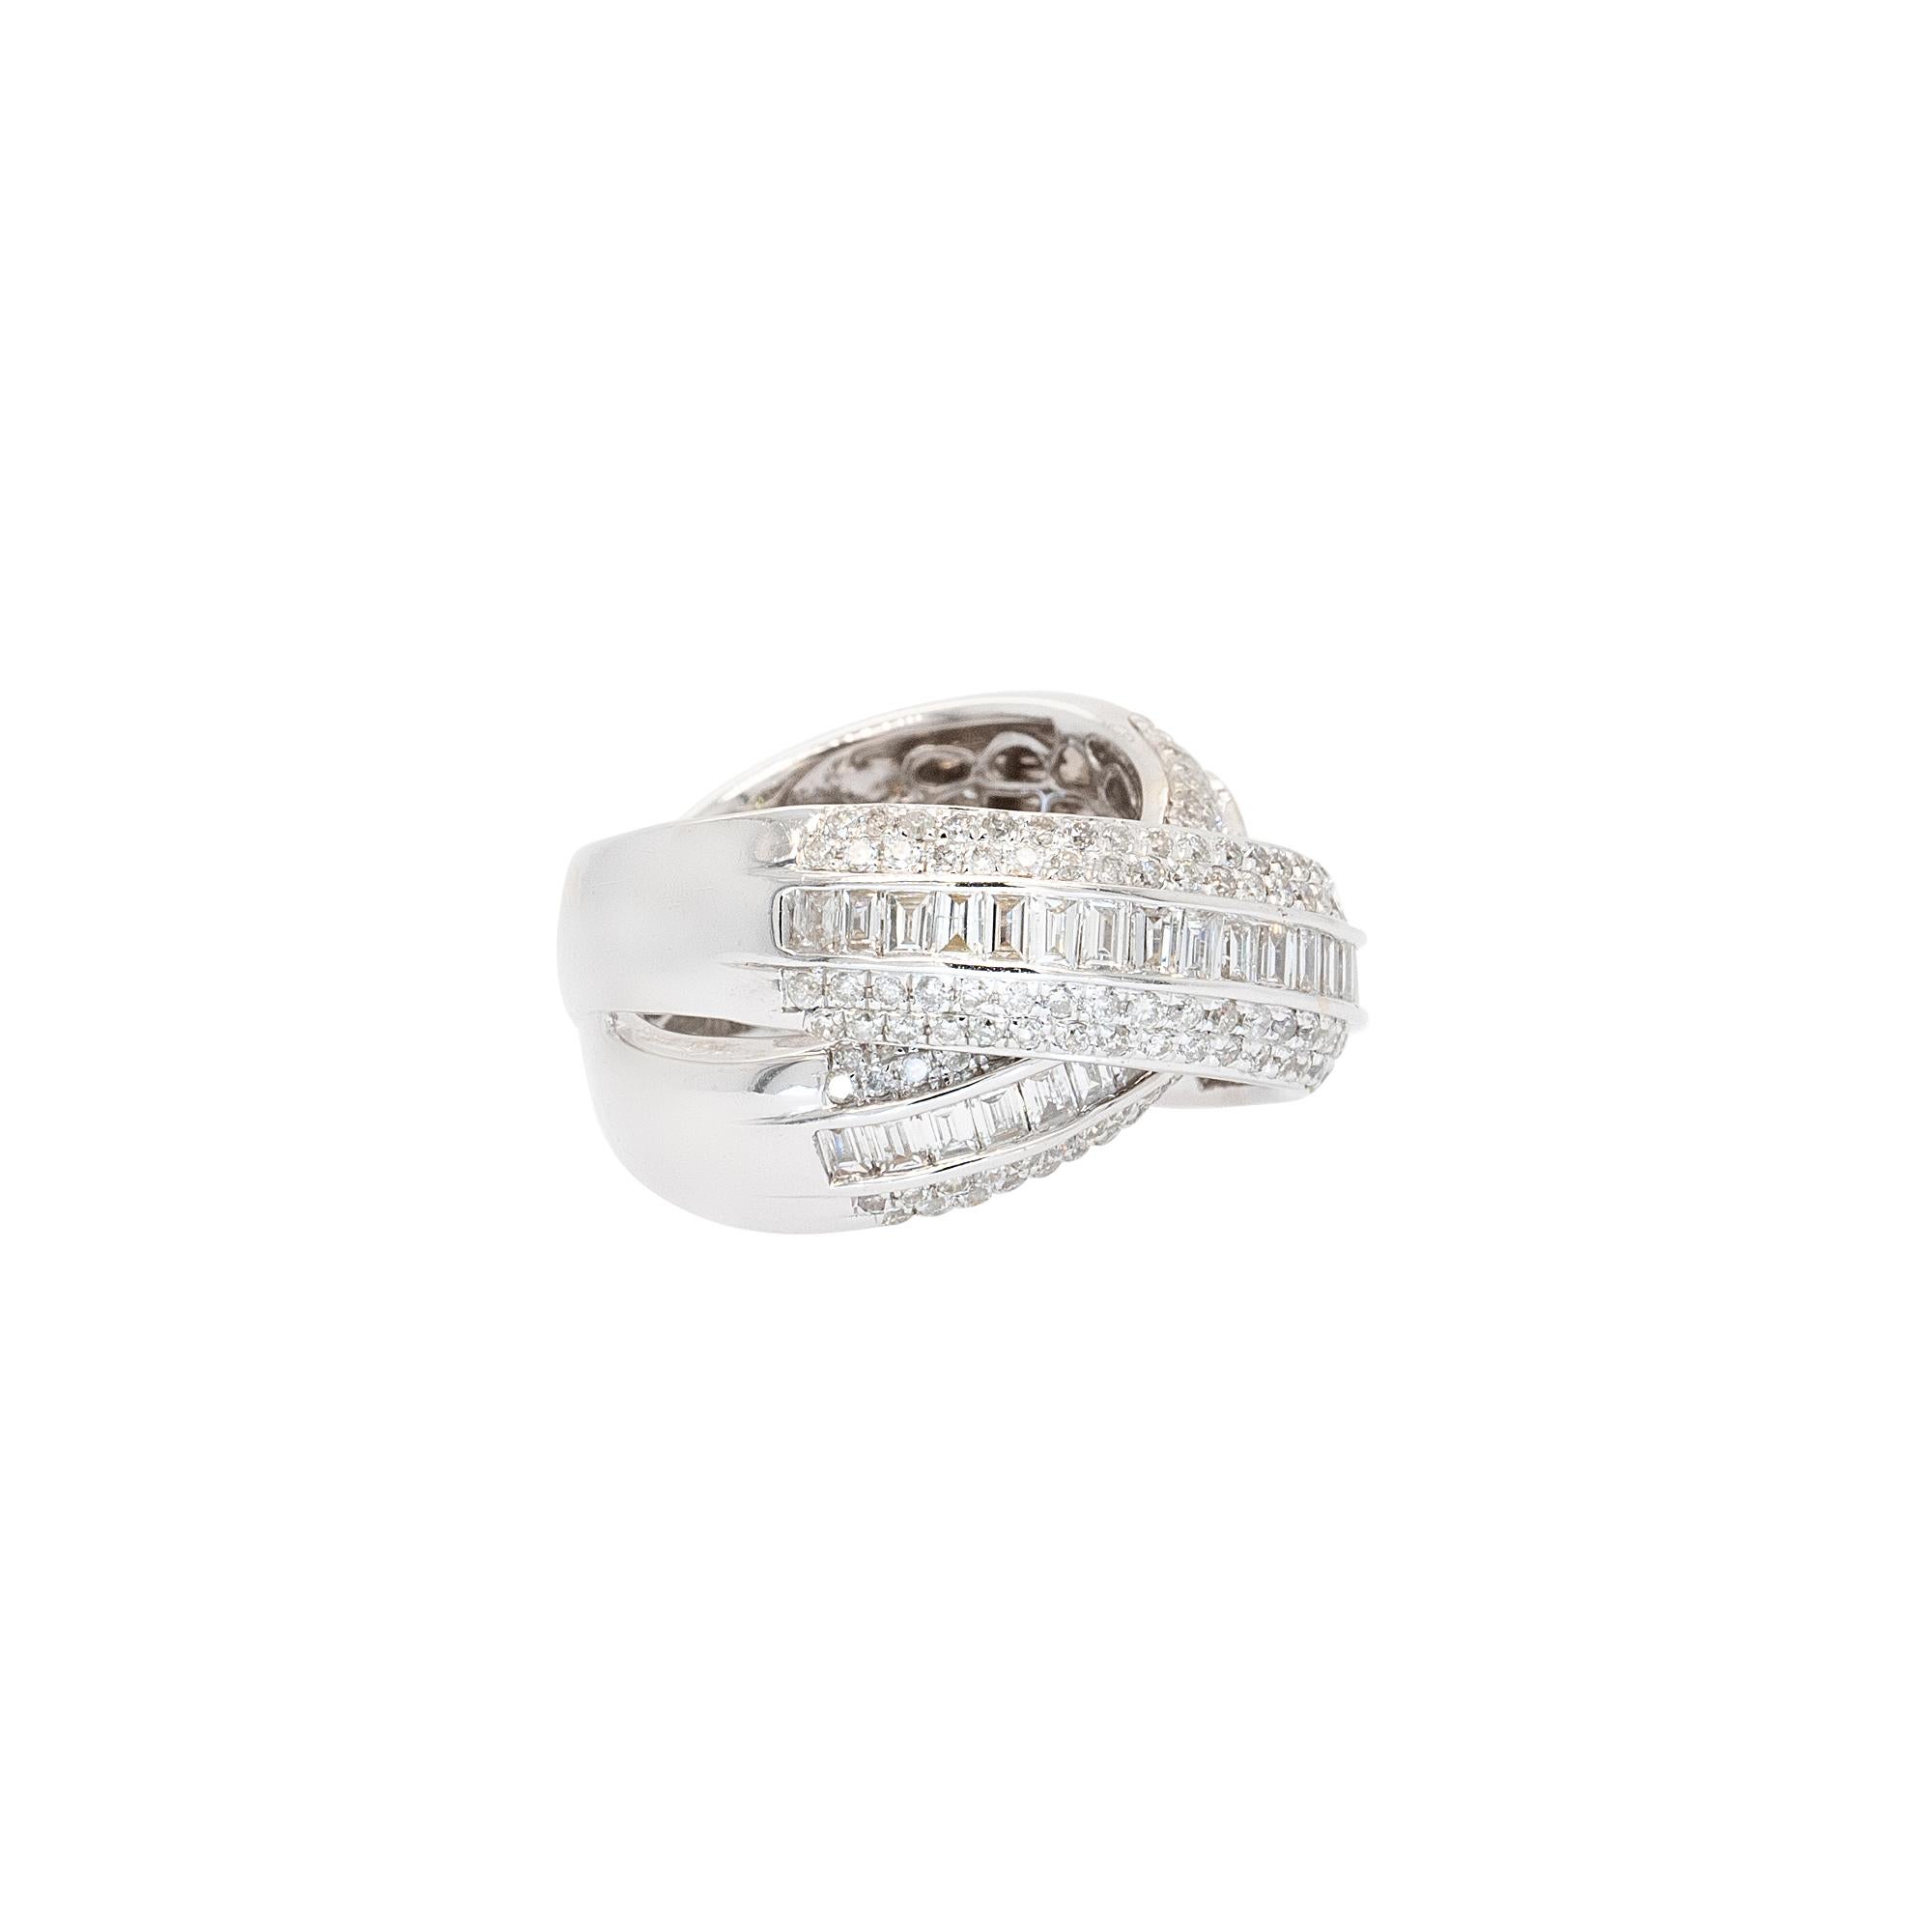 Diamond Details: 
Approx 2.60ctw Round Brilliant and Baguette Natural Diamond 
G/H Color SI Clarity
Ring Material: 18k White Gold
Ring Size: 7.5 (can be sized)
Total Weight: 12.44g (7.99dwt)
This item comes with a presentation box!
SKU: